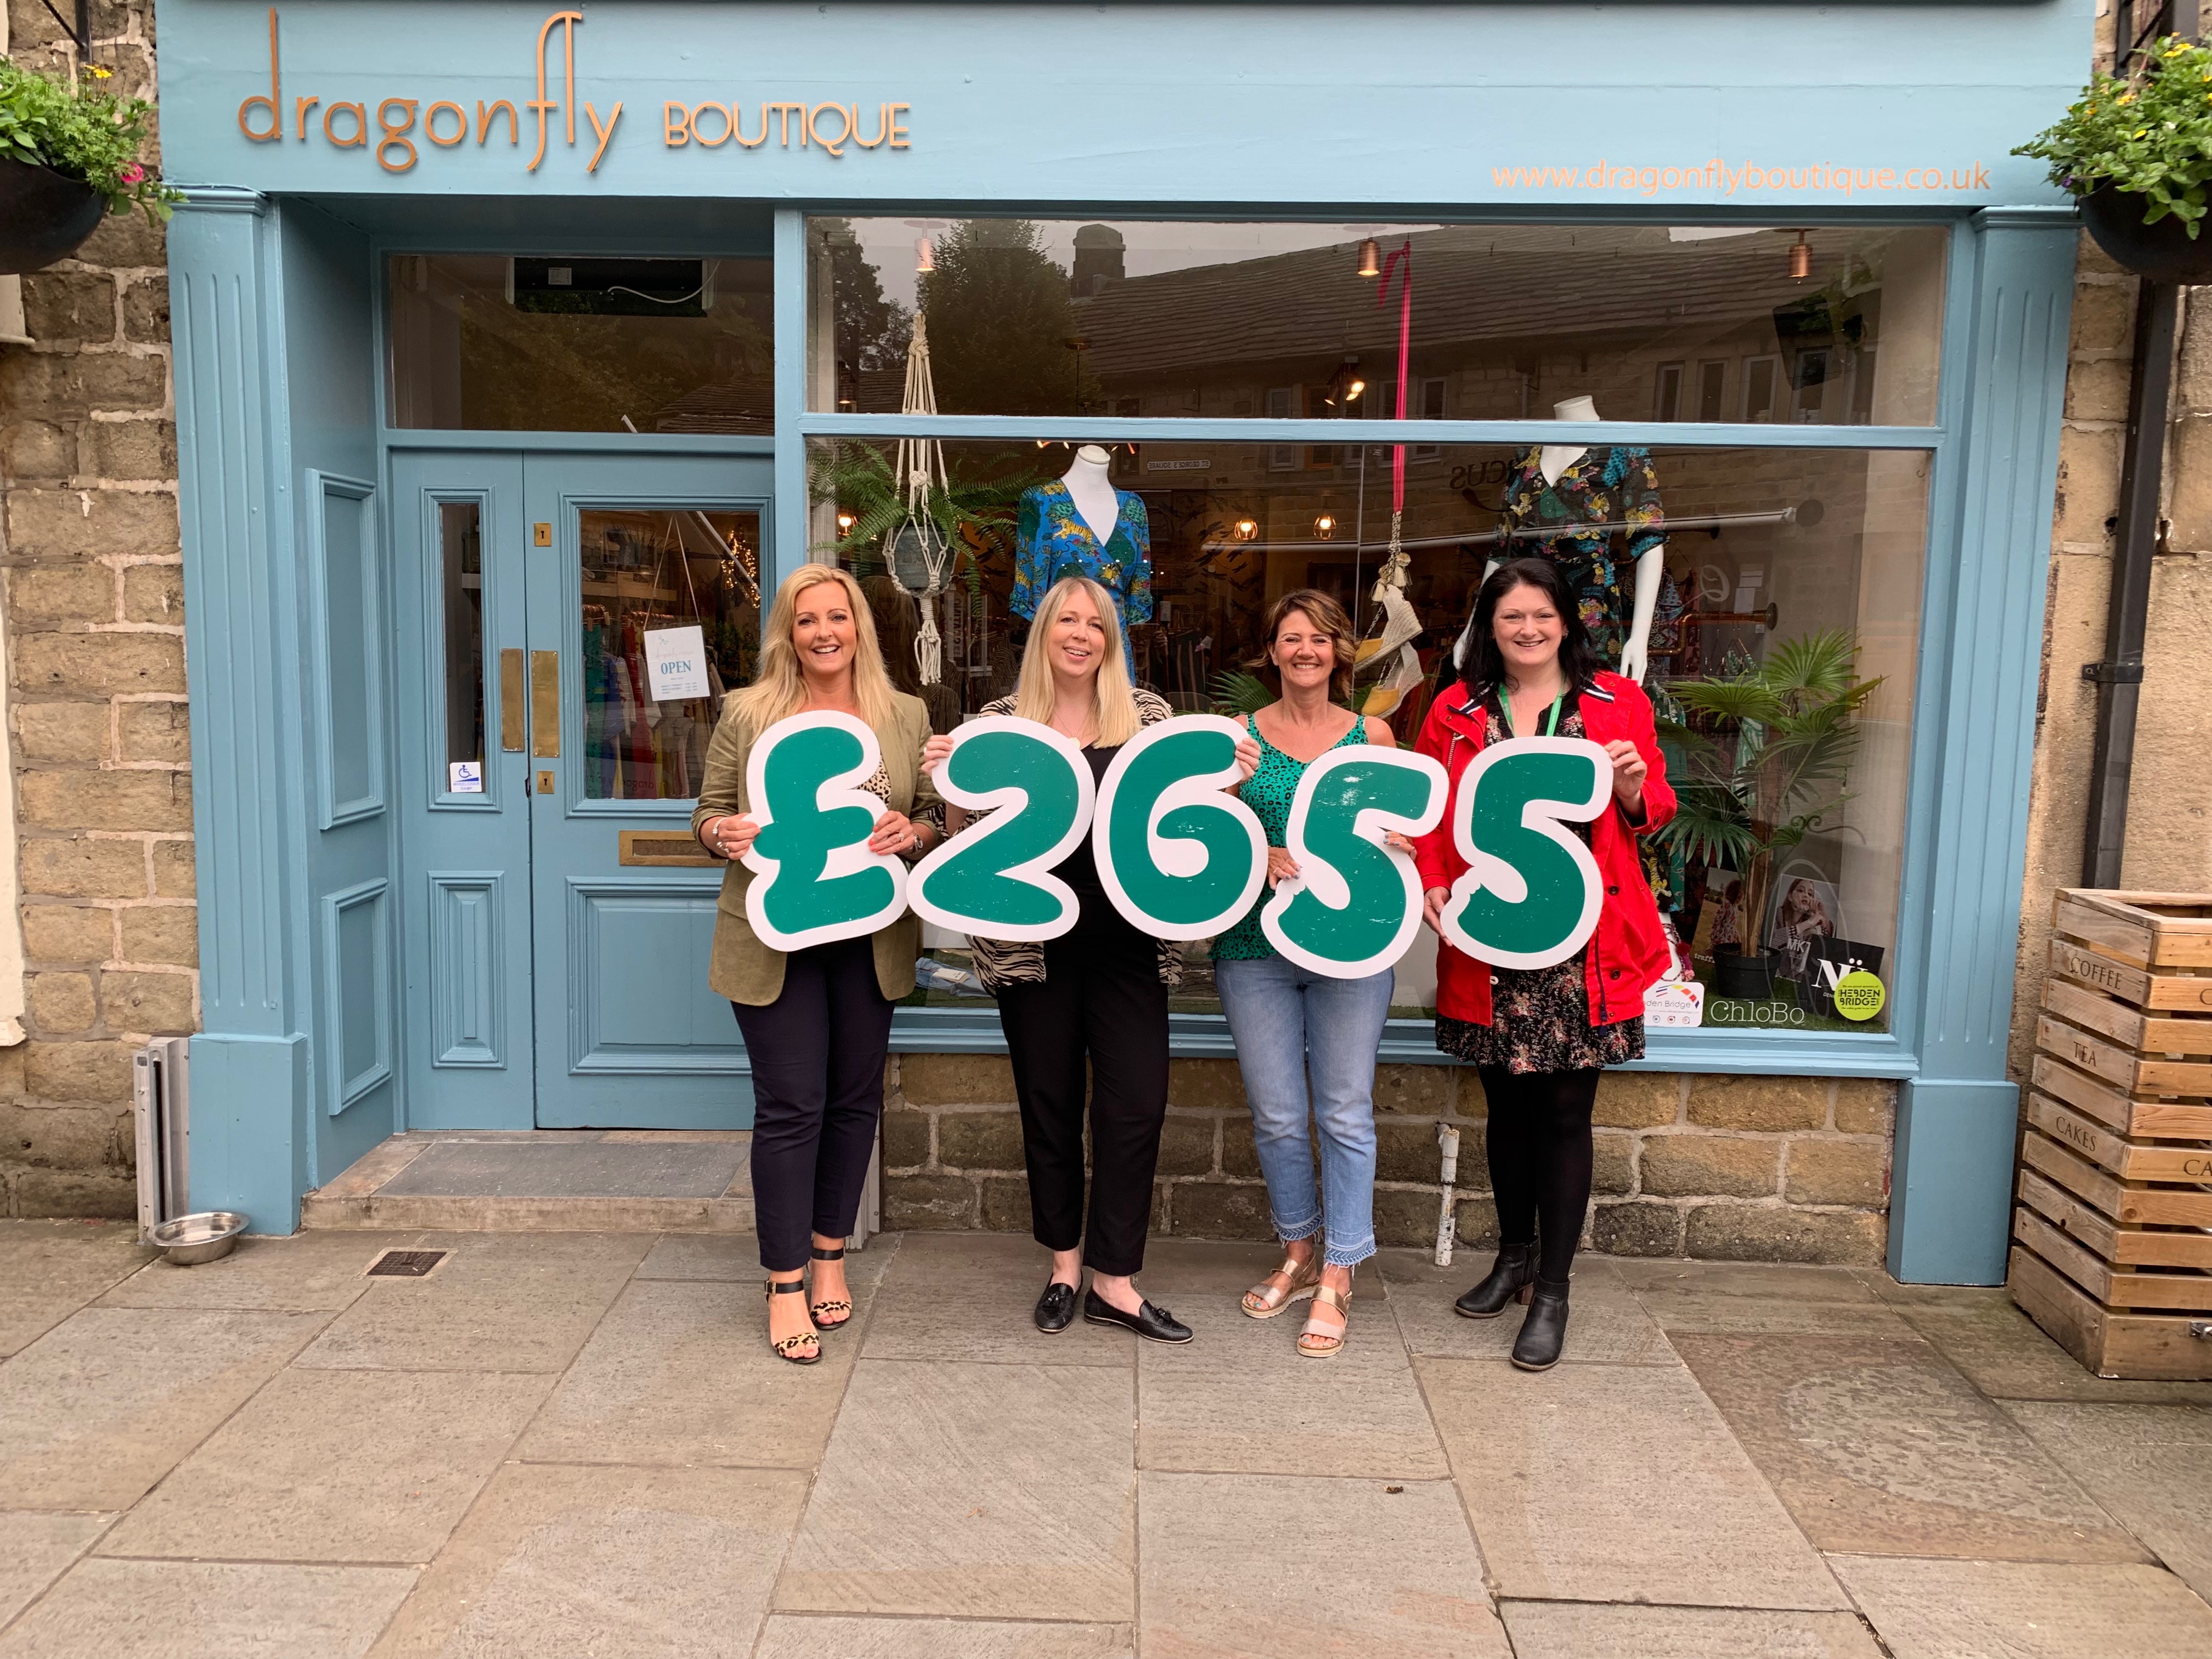 Hebden Bridge businesses join forces to raise over £2500 for Calderdale cancer charity image